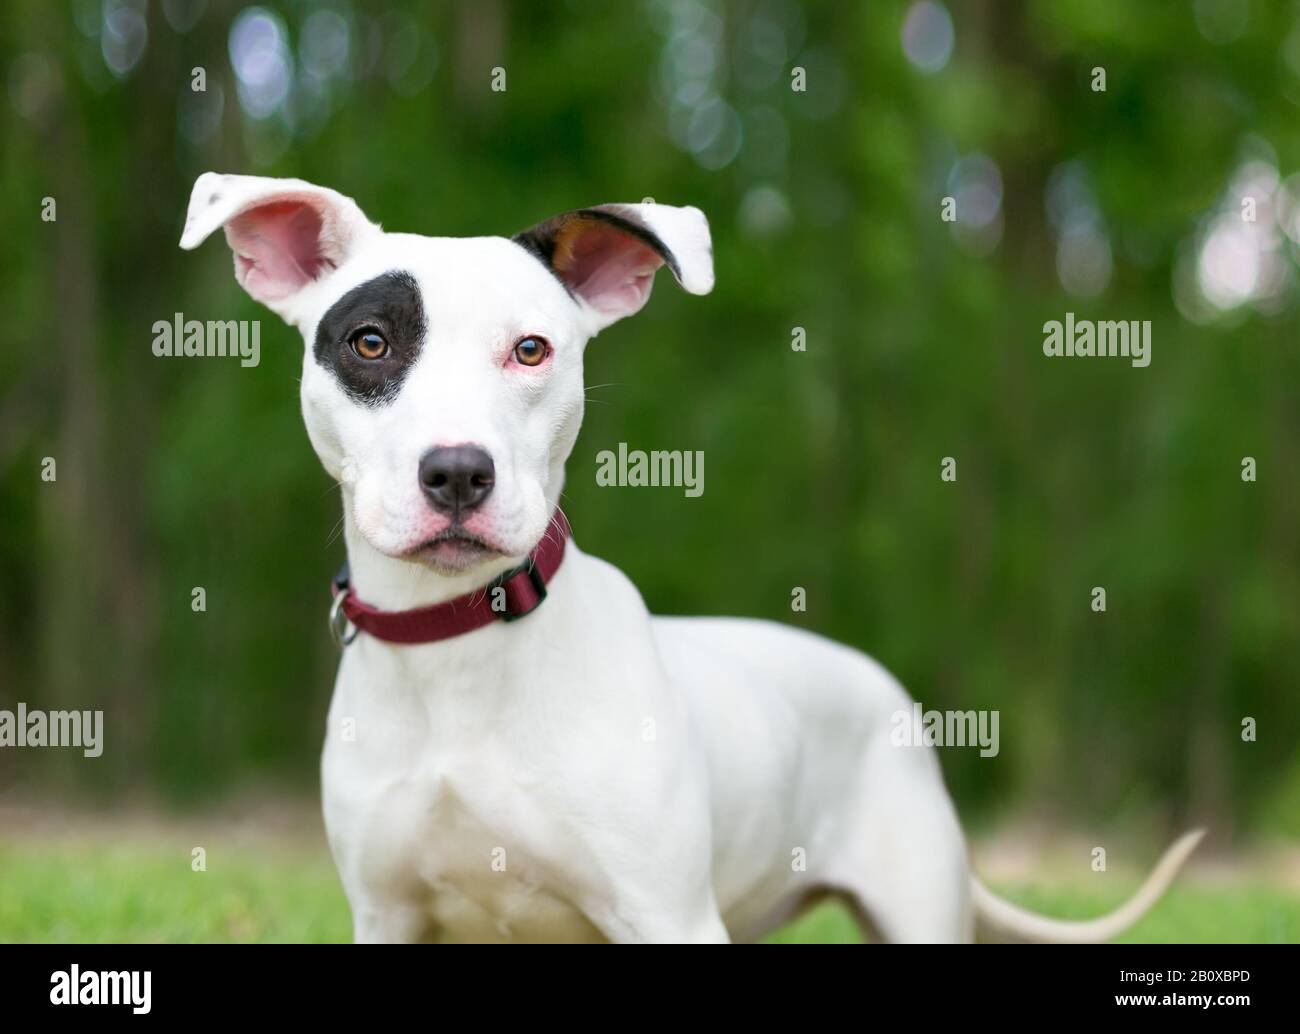 A Terrier mixed breed puppy with large floppy ears and a black eye patch outdoors Stock Photo